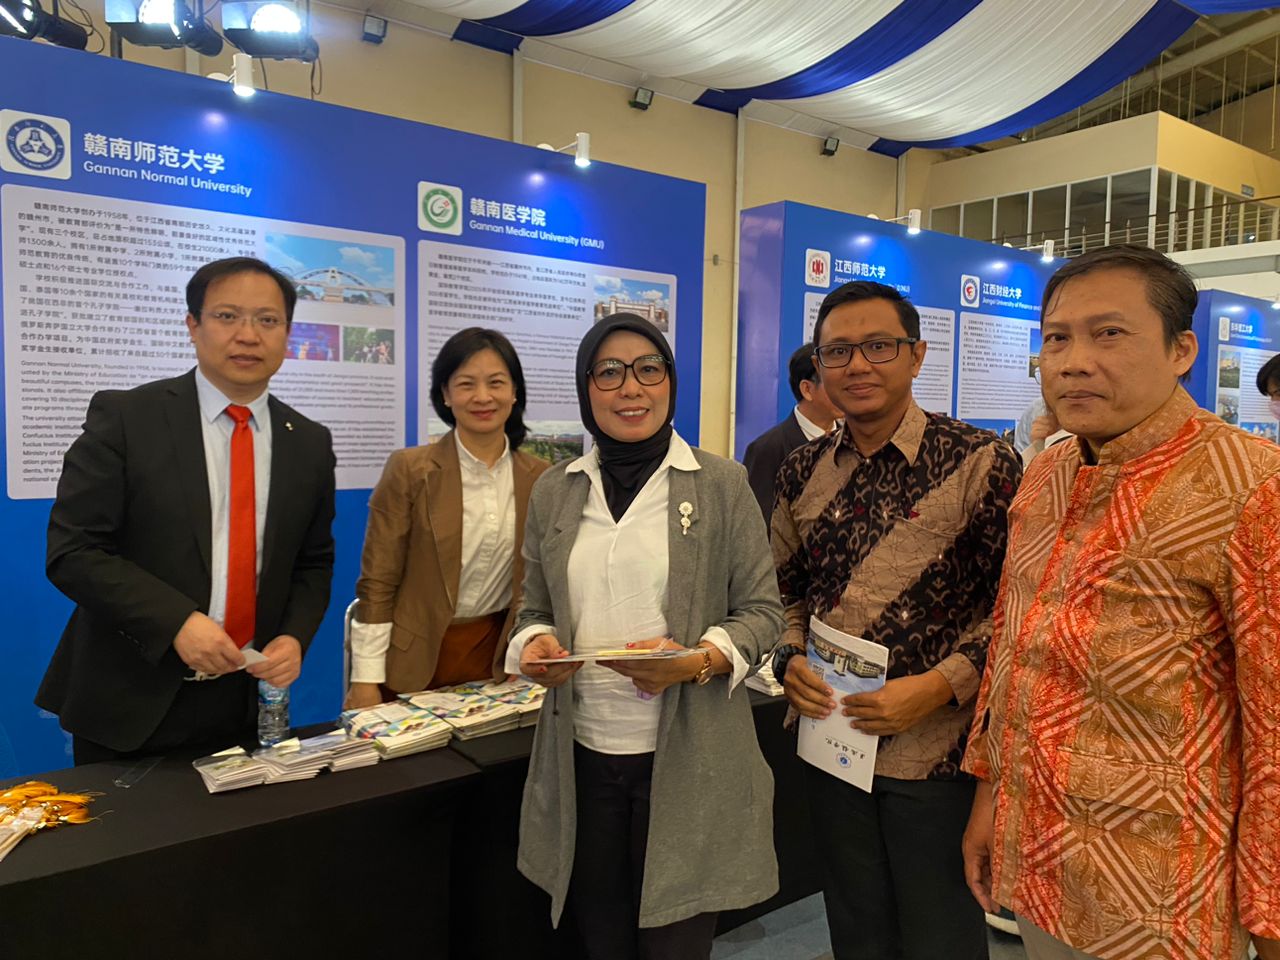 Jiangxi Instituion of Higher Education Overseas Exhibition (CHINA-INDONESIA Cooperation)